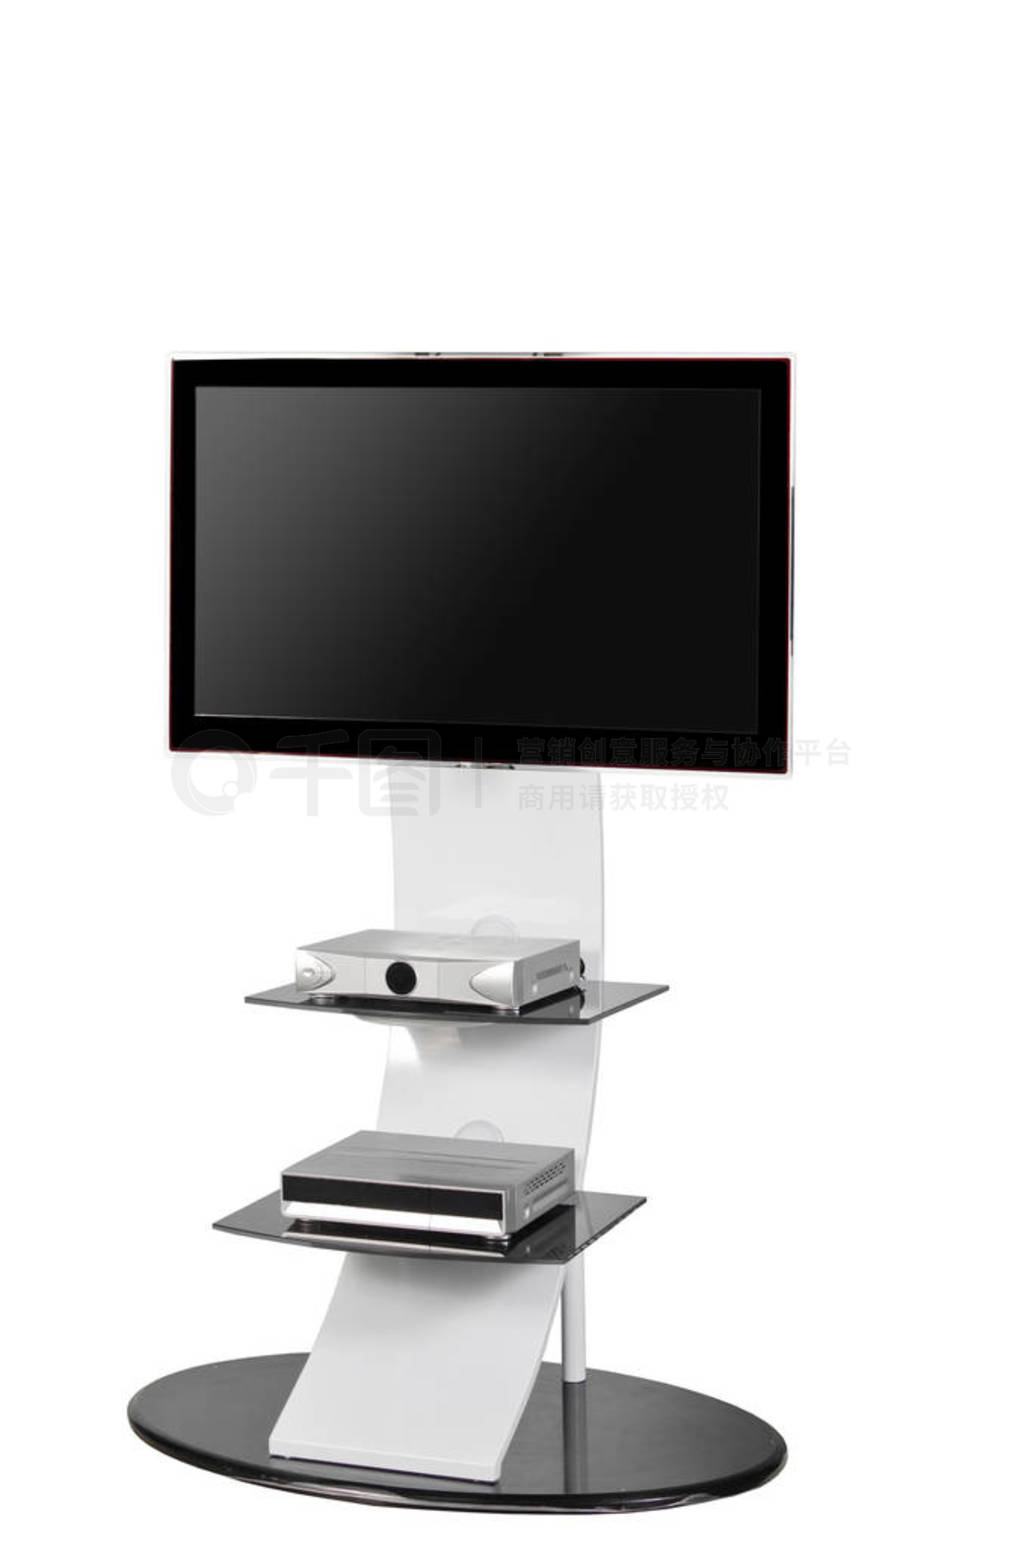 Plasma (LED) TV on a stand isolated on a white background.